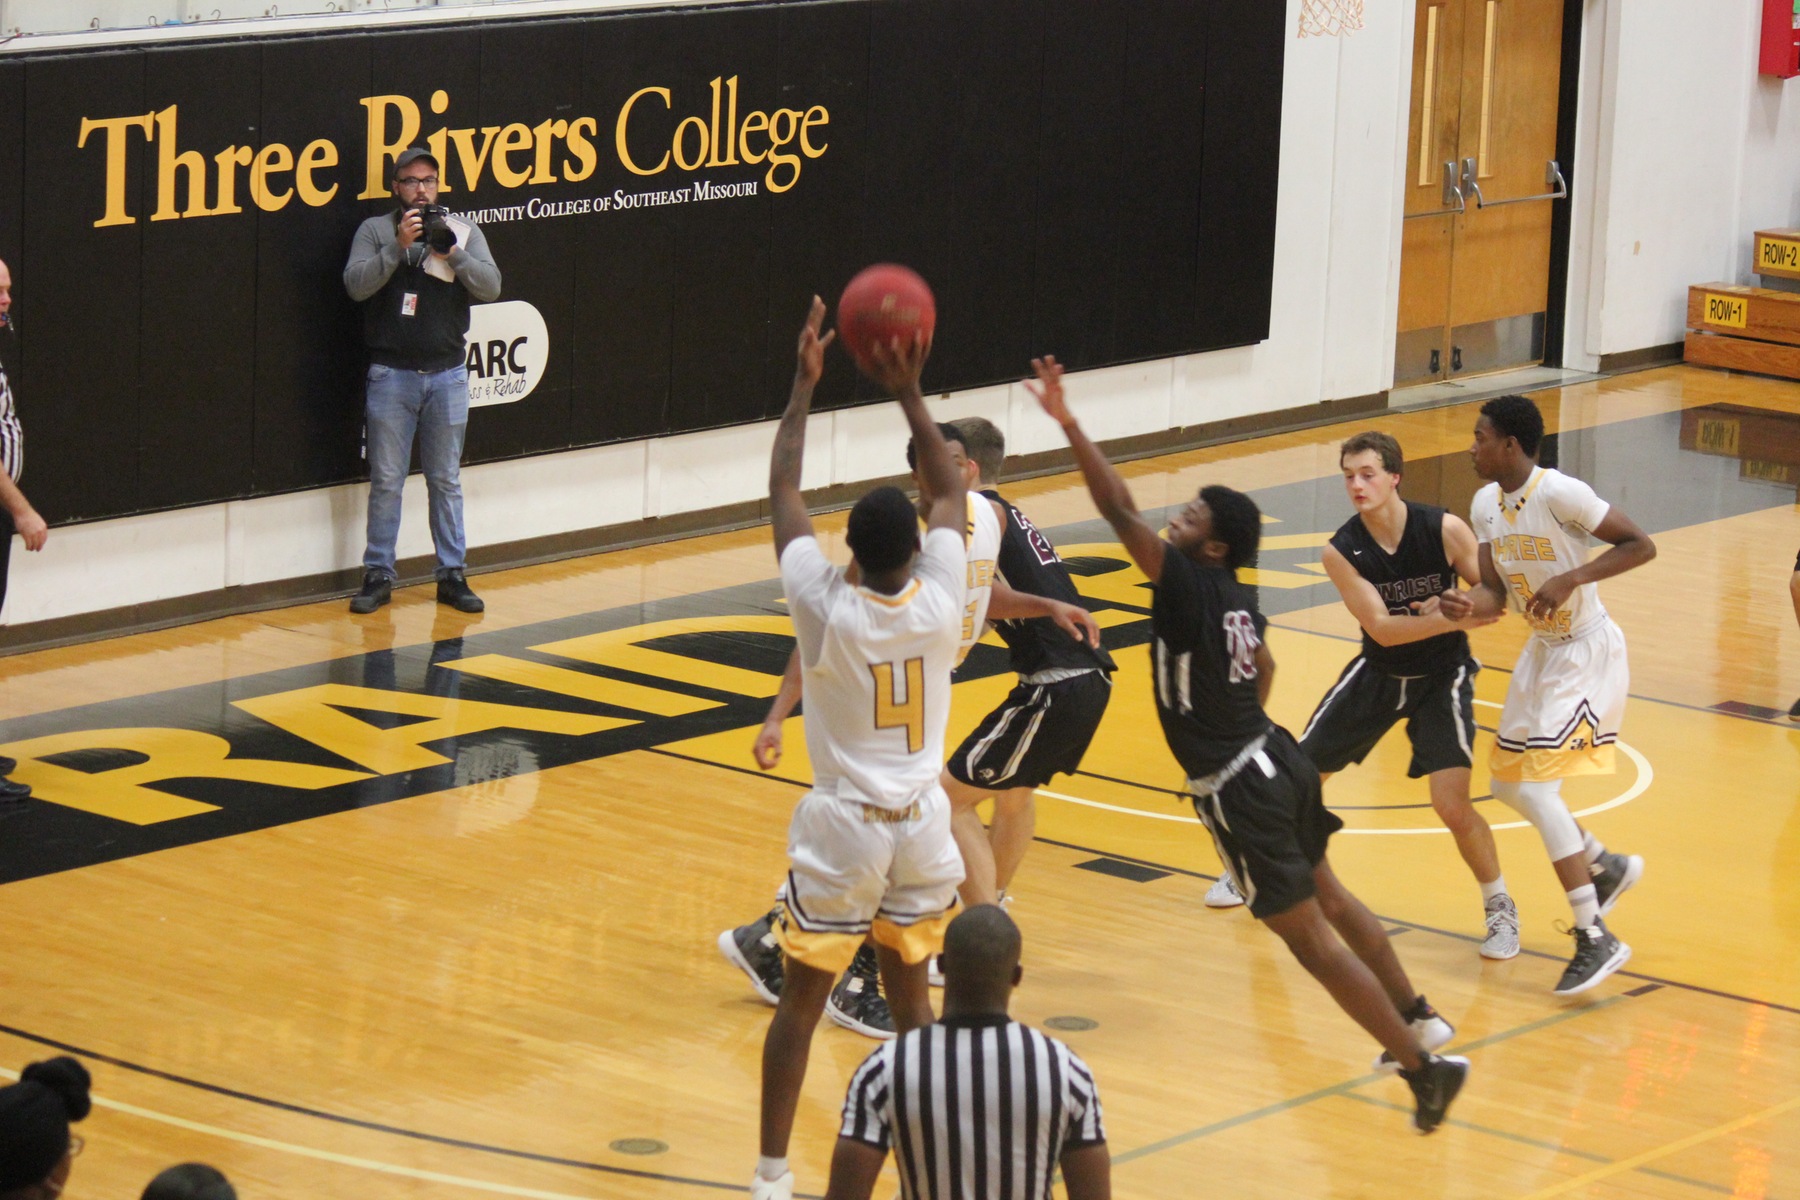 Raiders win big over STLCC with dominating second half